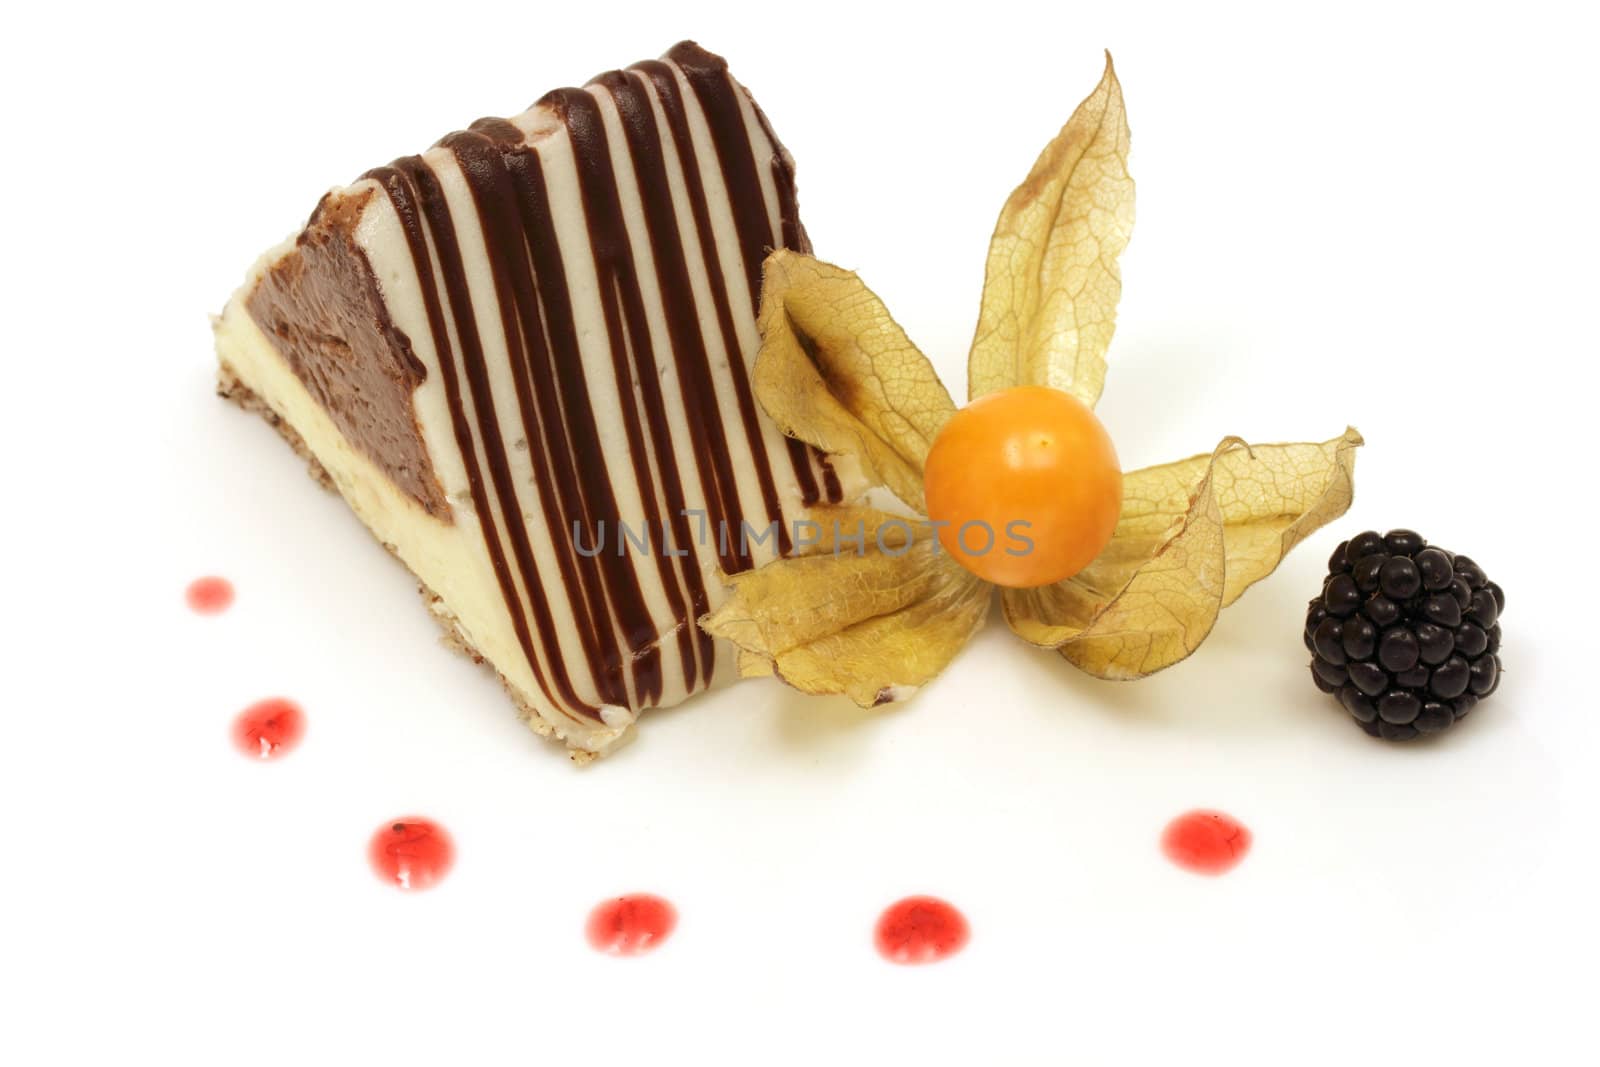 Chocolate triangle cake decorated with ground cherry on white background